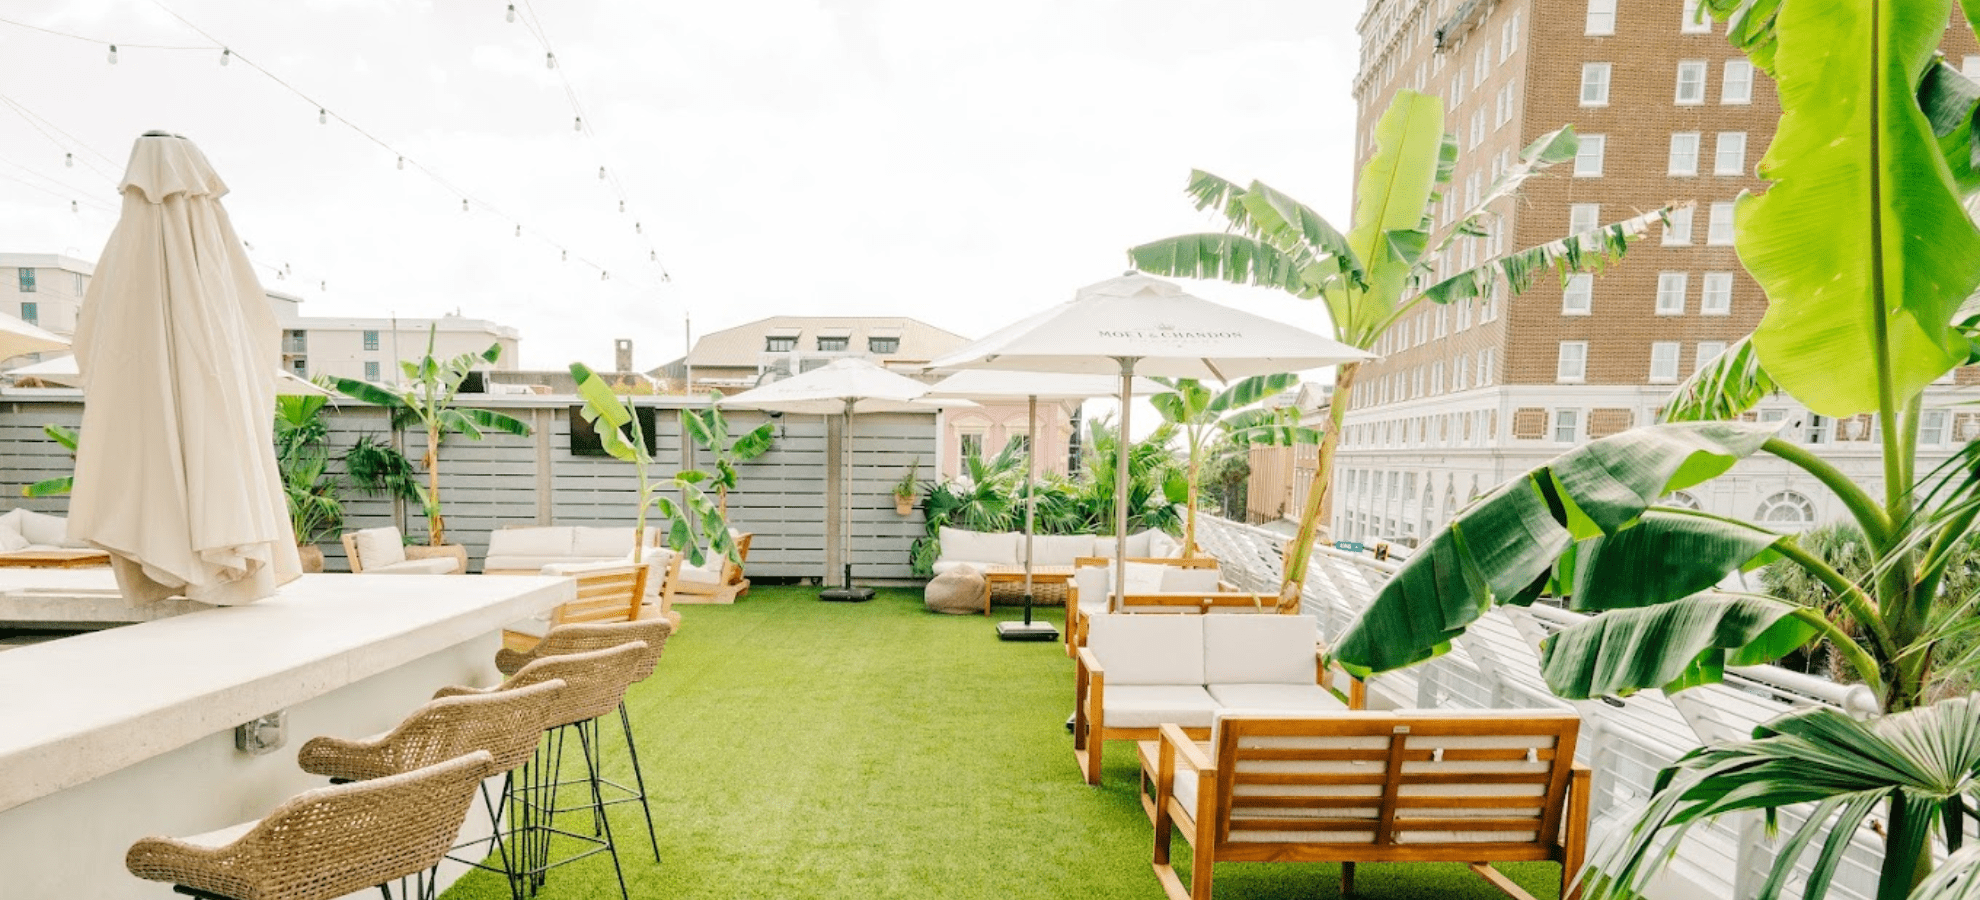 8 Rooftop Bars in Charleston You’re Going to Love